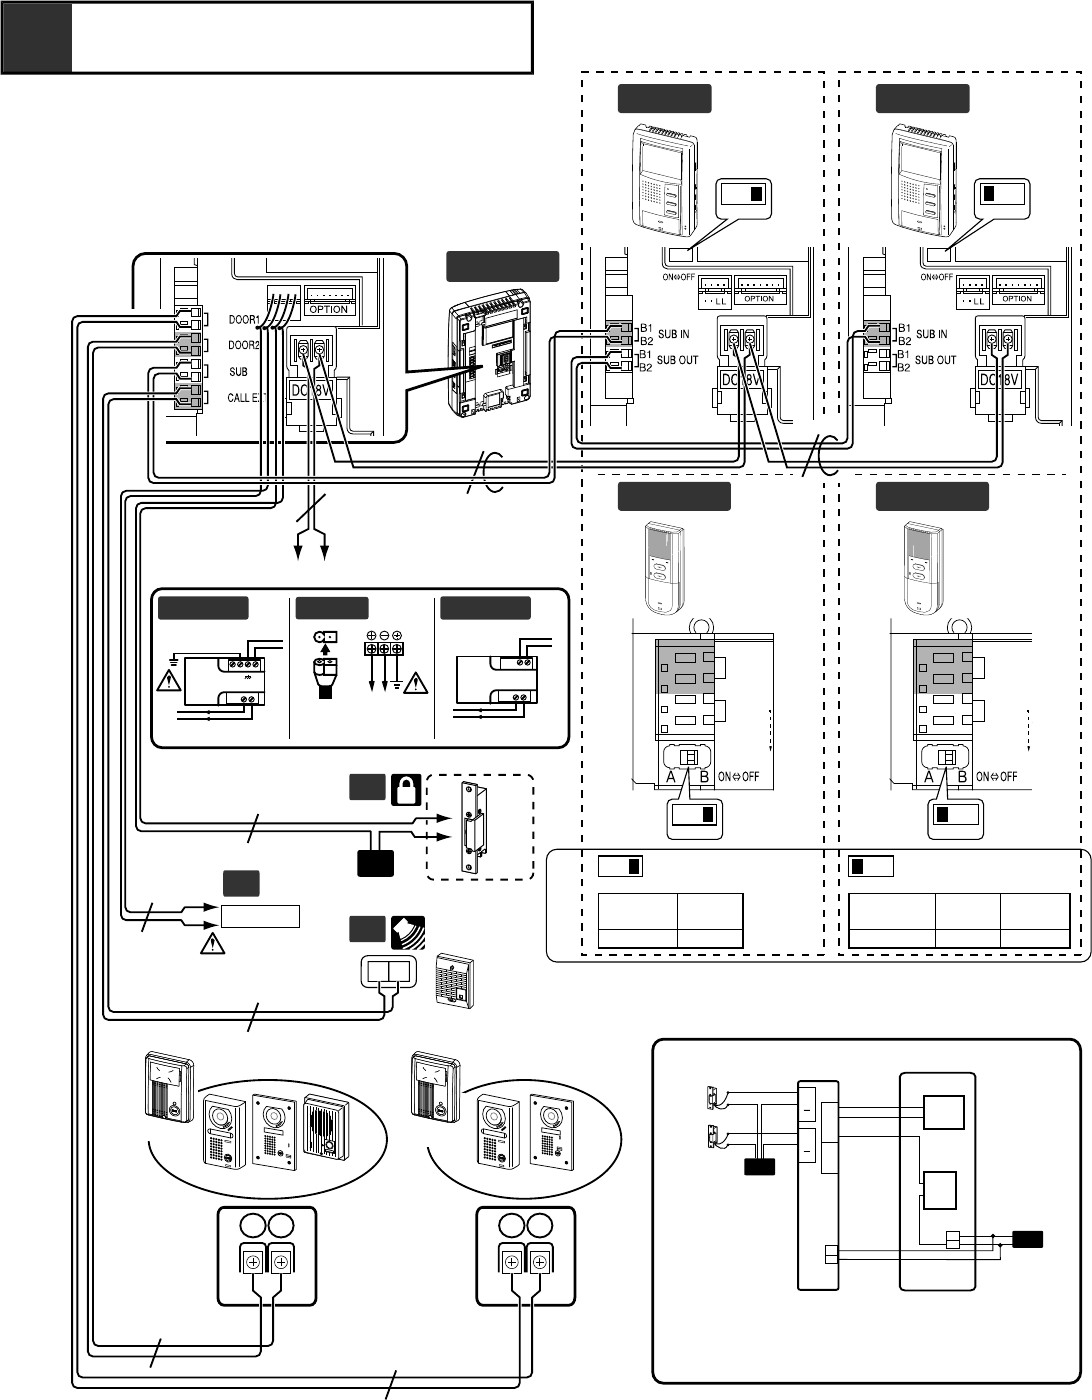 AiPhone Inter Wiring Diagram New Page 5 AiPhone Inter System AiPhone Inter Wiring Diagram Download